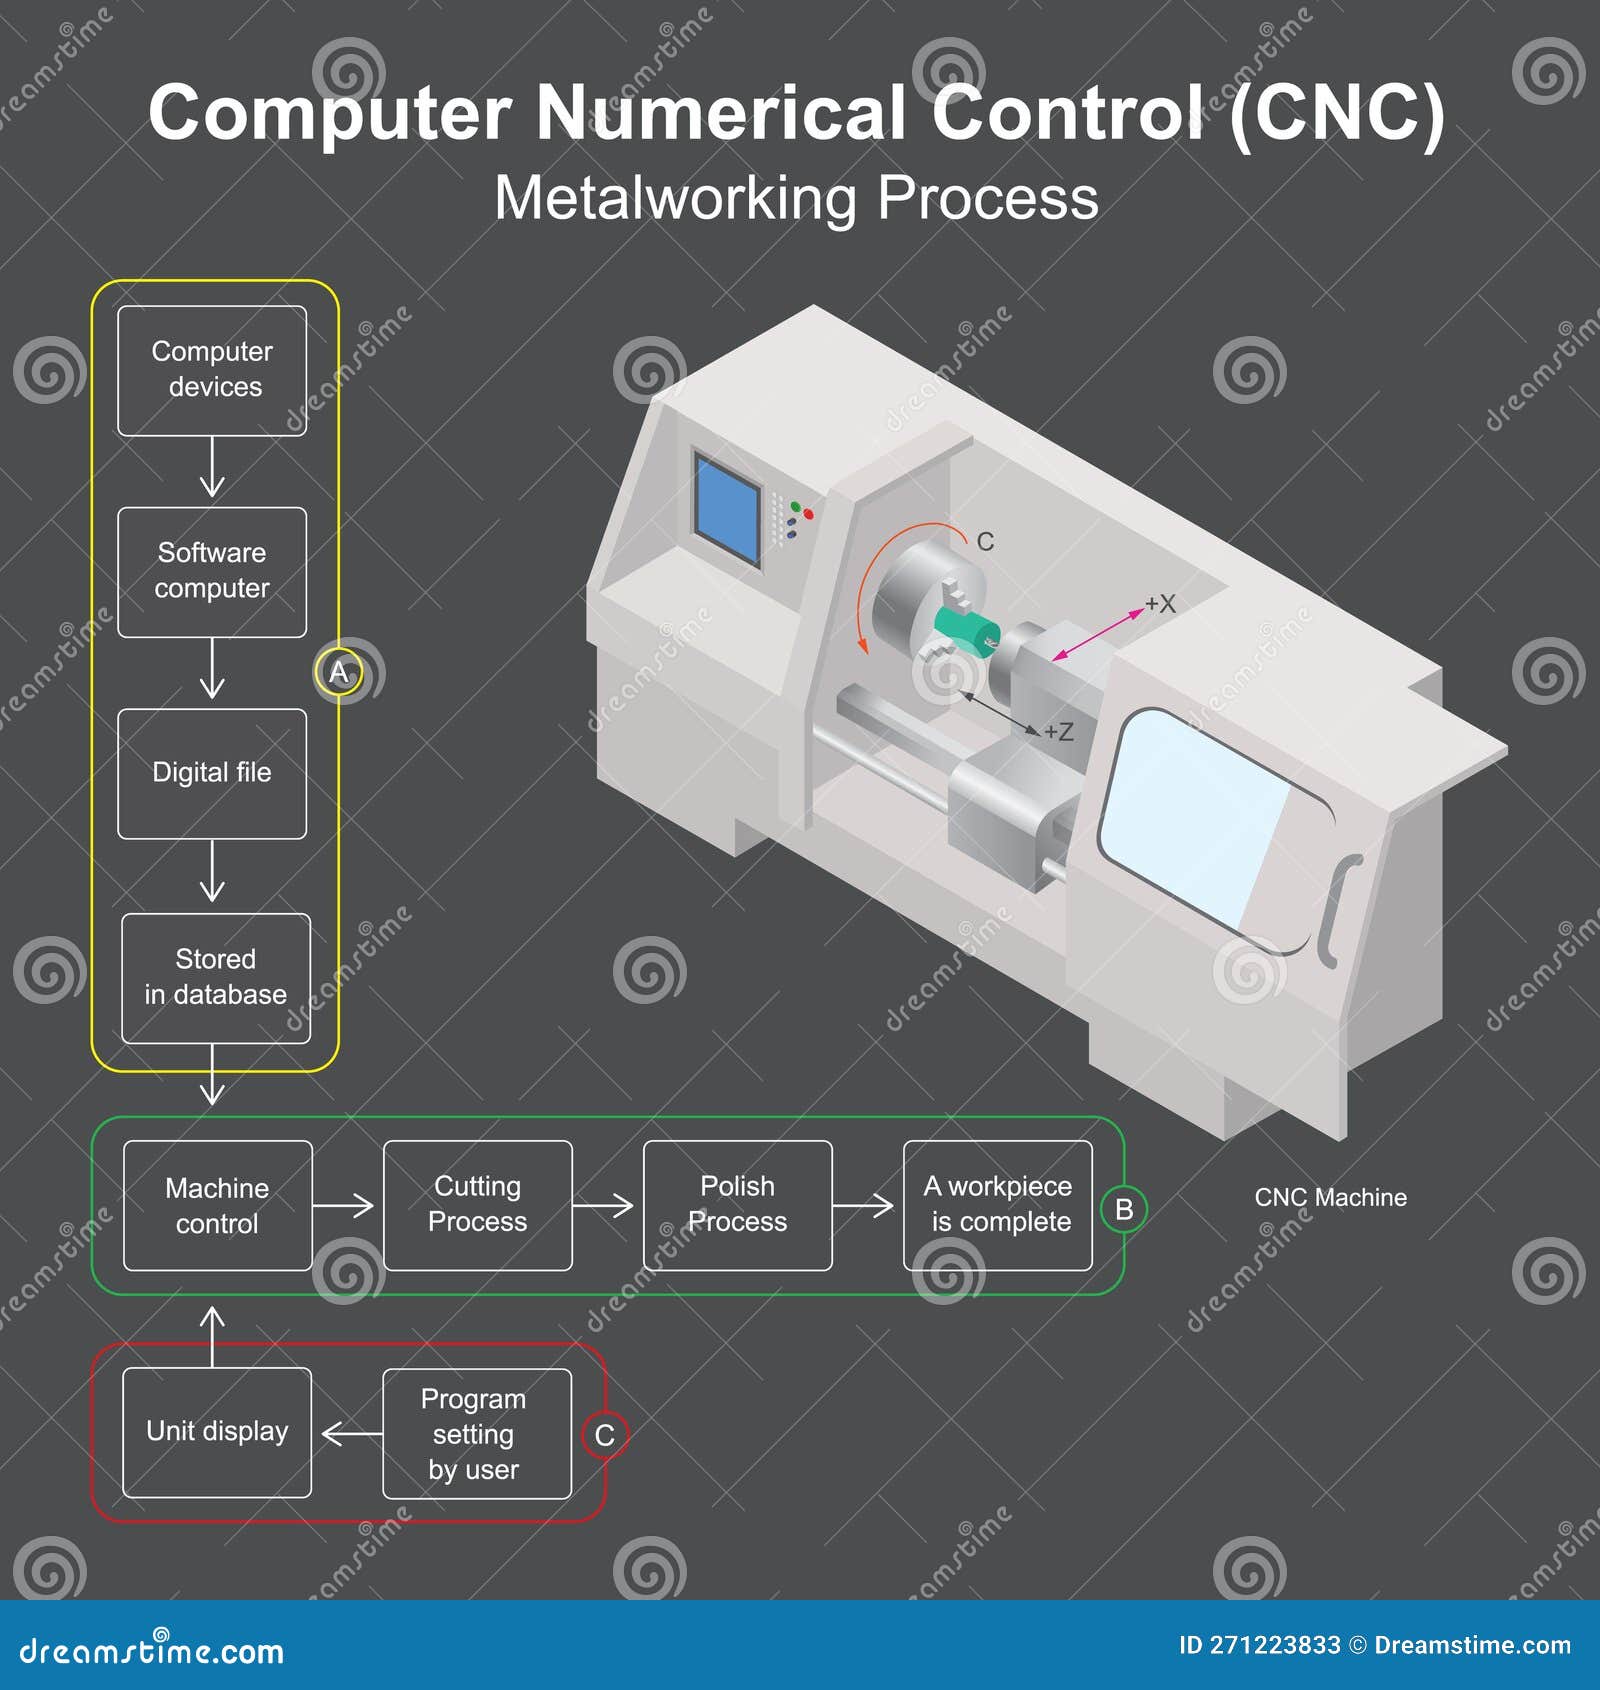 computer numerical control. a method of automating control of machine cutting metal the use microcomputer systems